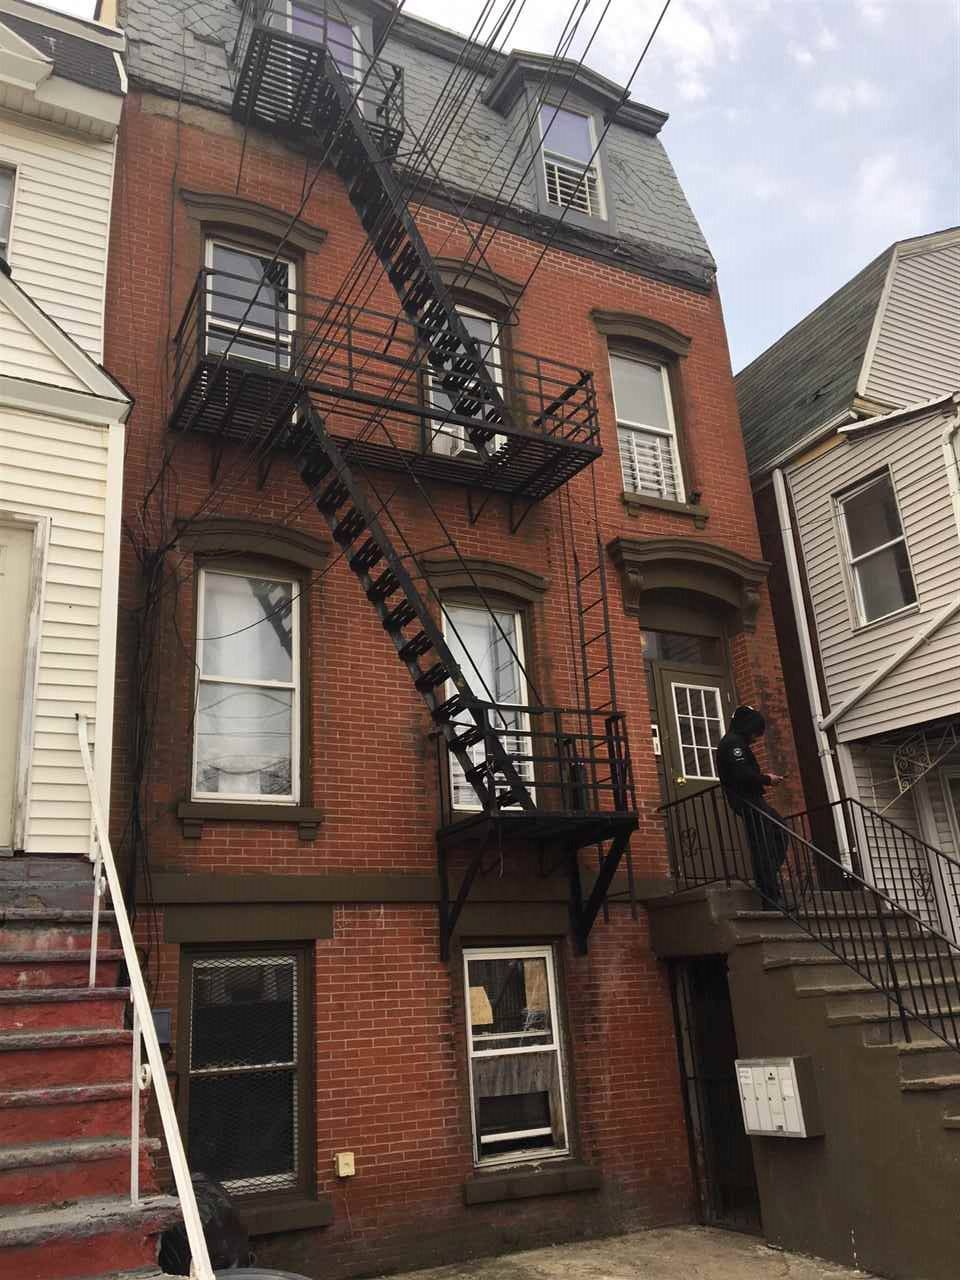 2 multi-family properties being sold as a package deal only